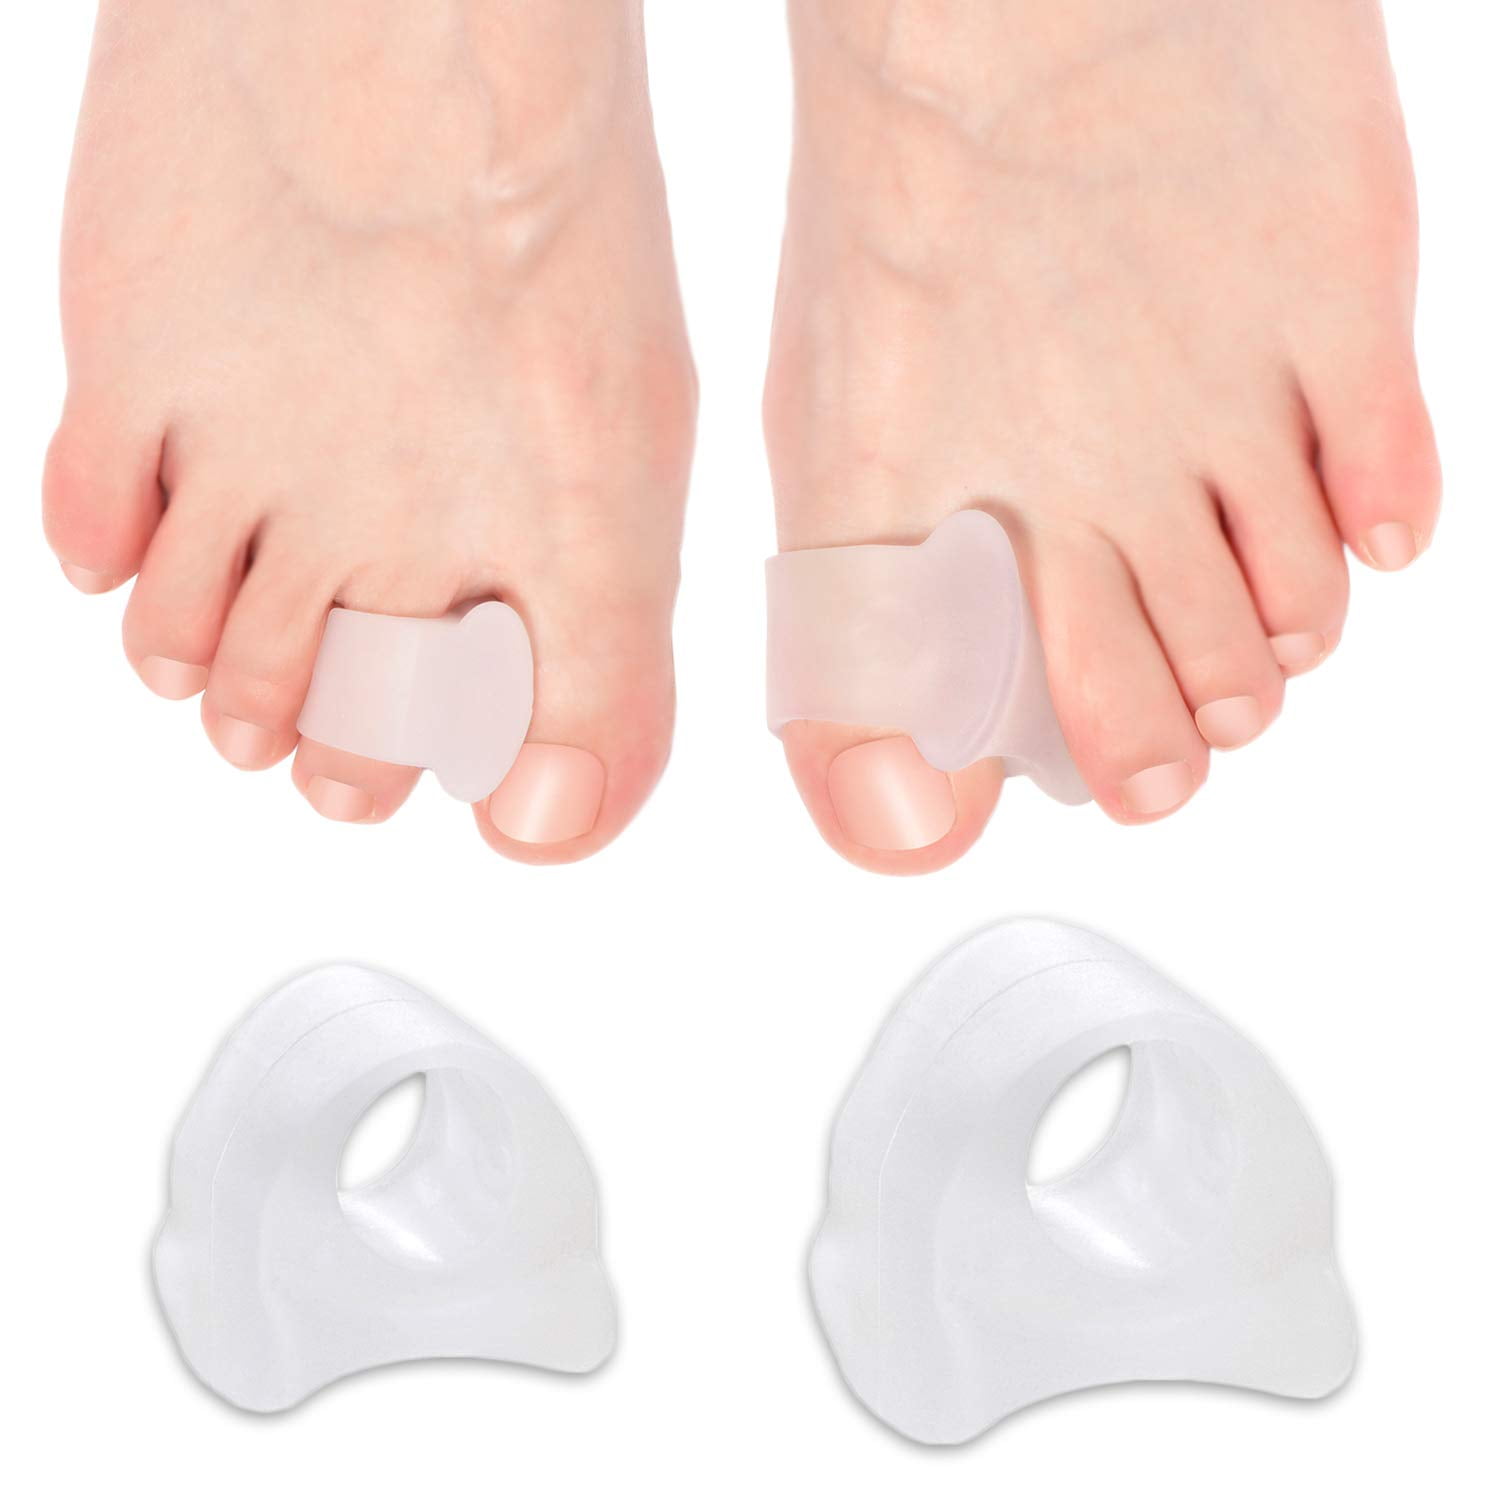 Peaoy 6Pcs Toe Separators with 2 Loops Silicone Bunion Corrector Big Toe  Spacer for Crooked and Overlap Toe (Beige)